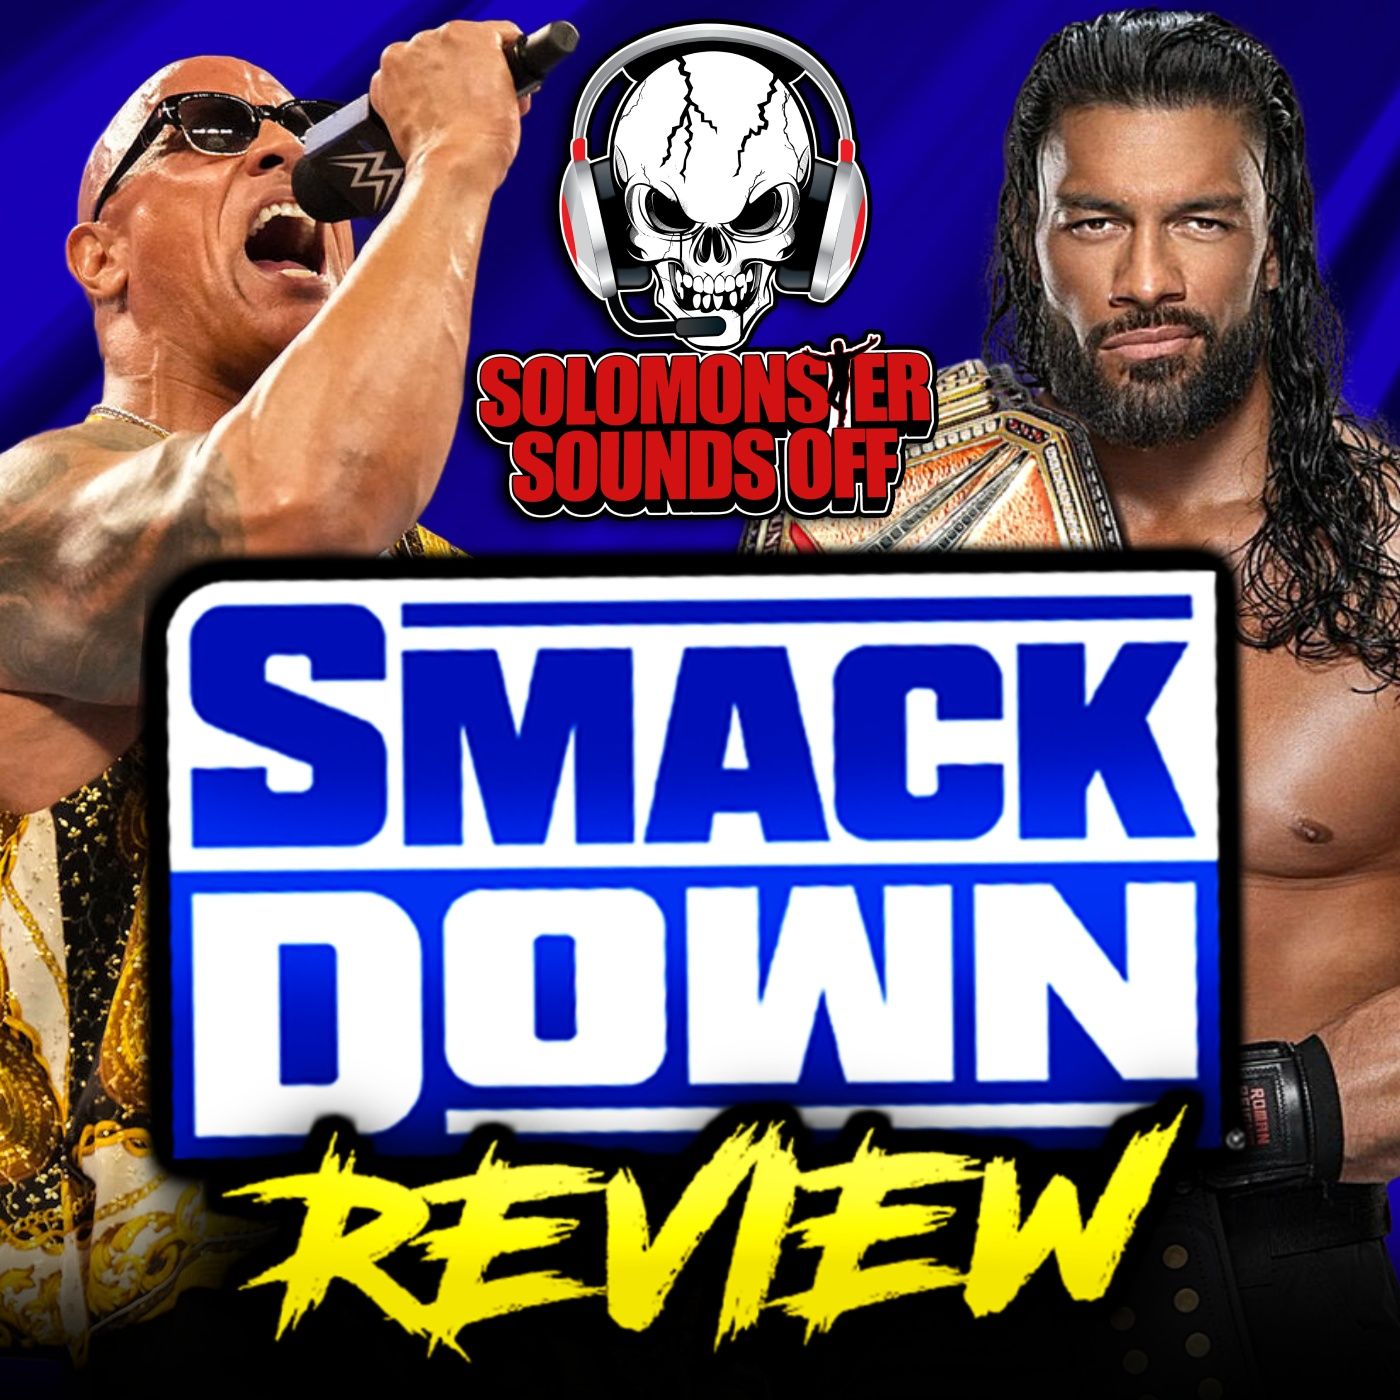 WWE Smackdown 3/15/14 Review - THE ROCK Mocks Cody Rhodes Crying And Takes Aim At Cody’s MOTHER